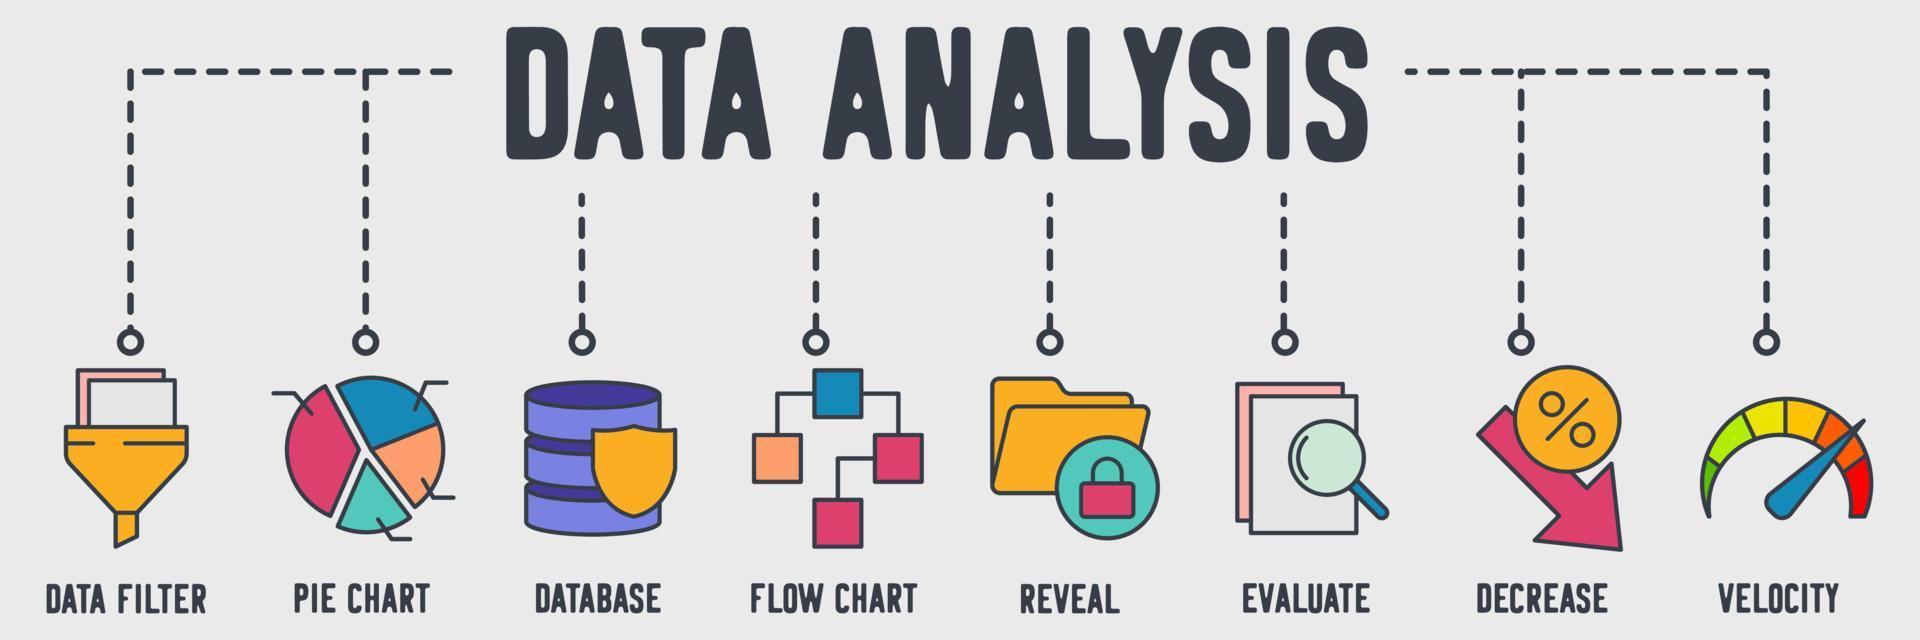 Data analysis banner web icon. data filter, pie chart, database, flow chart, reveal, evaluate, decrease, velocity vector illustration concept.